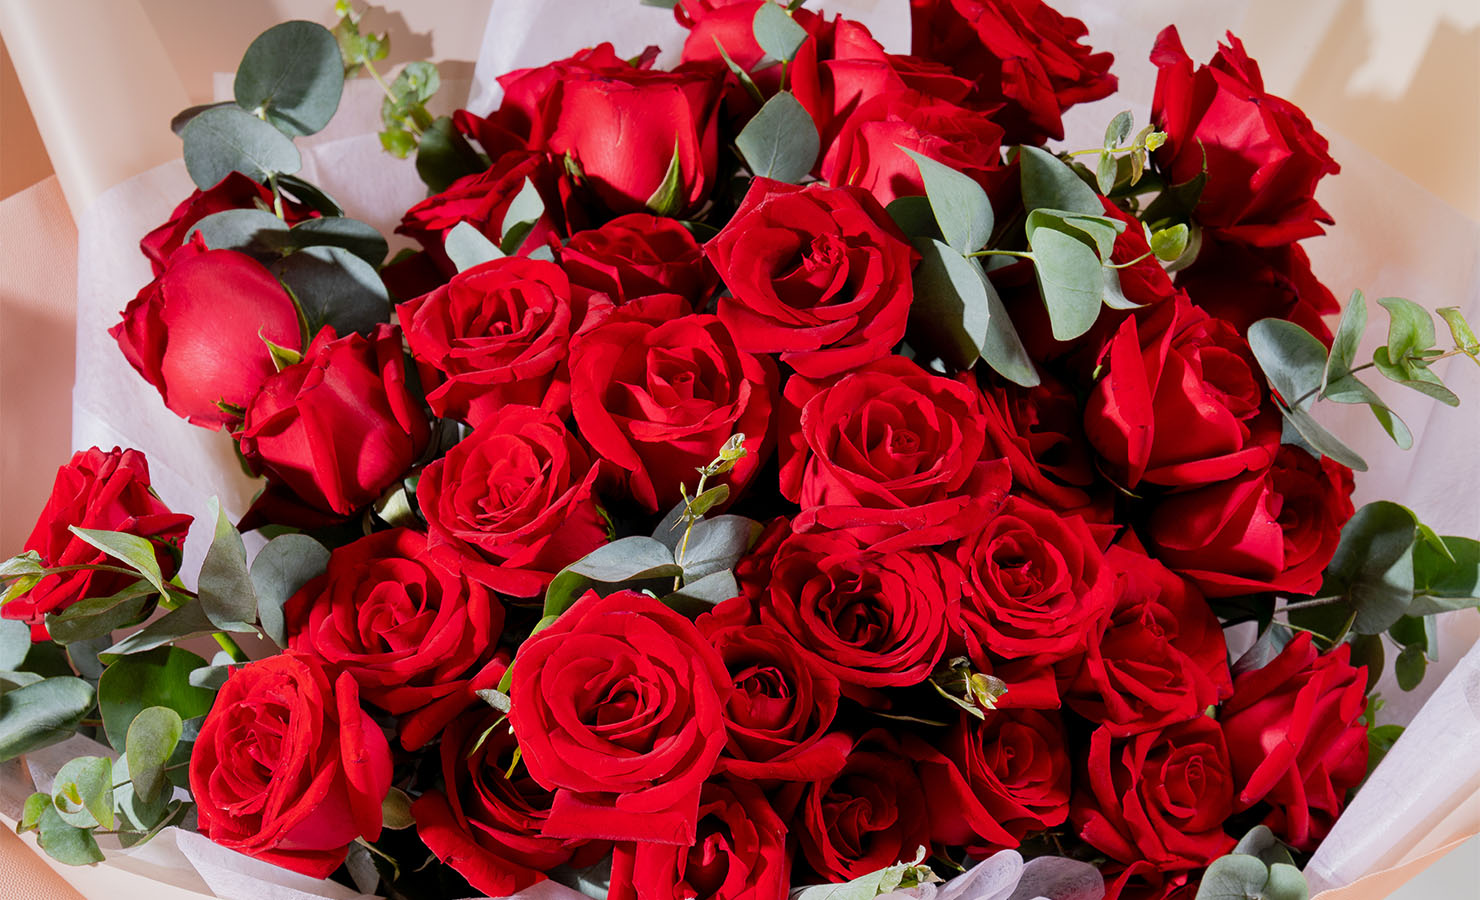 bloomthis-qixi-festival-gift-guide-02-ashley-red-rose-bouquet